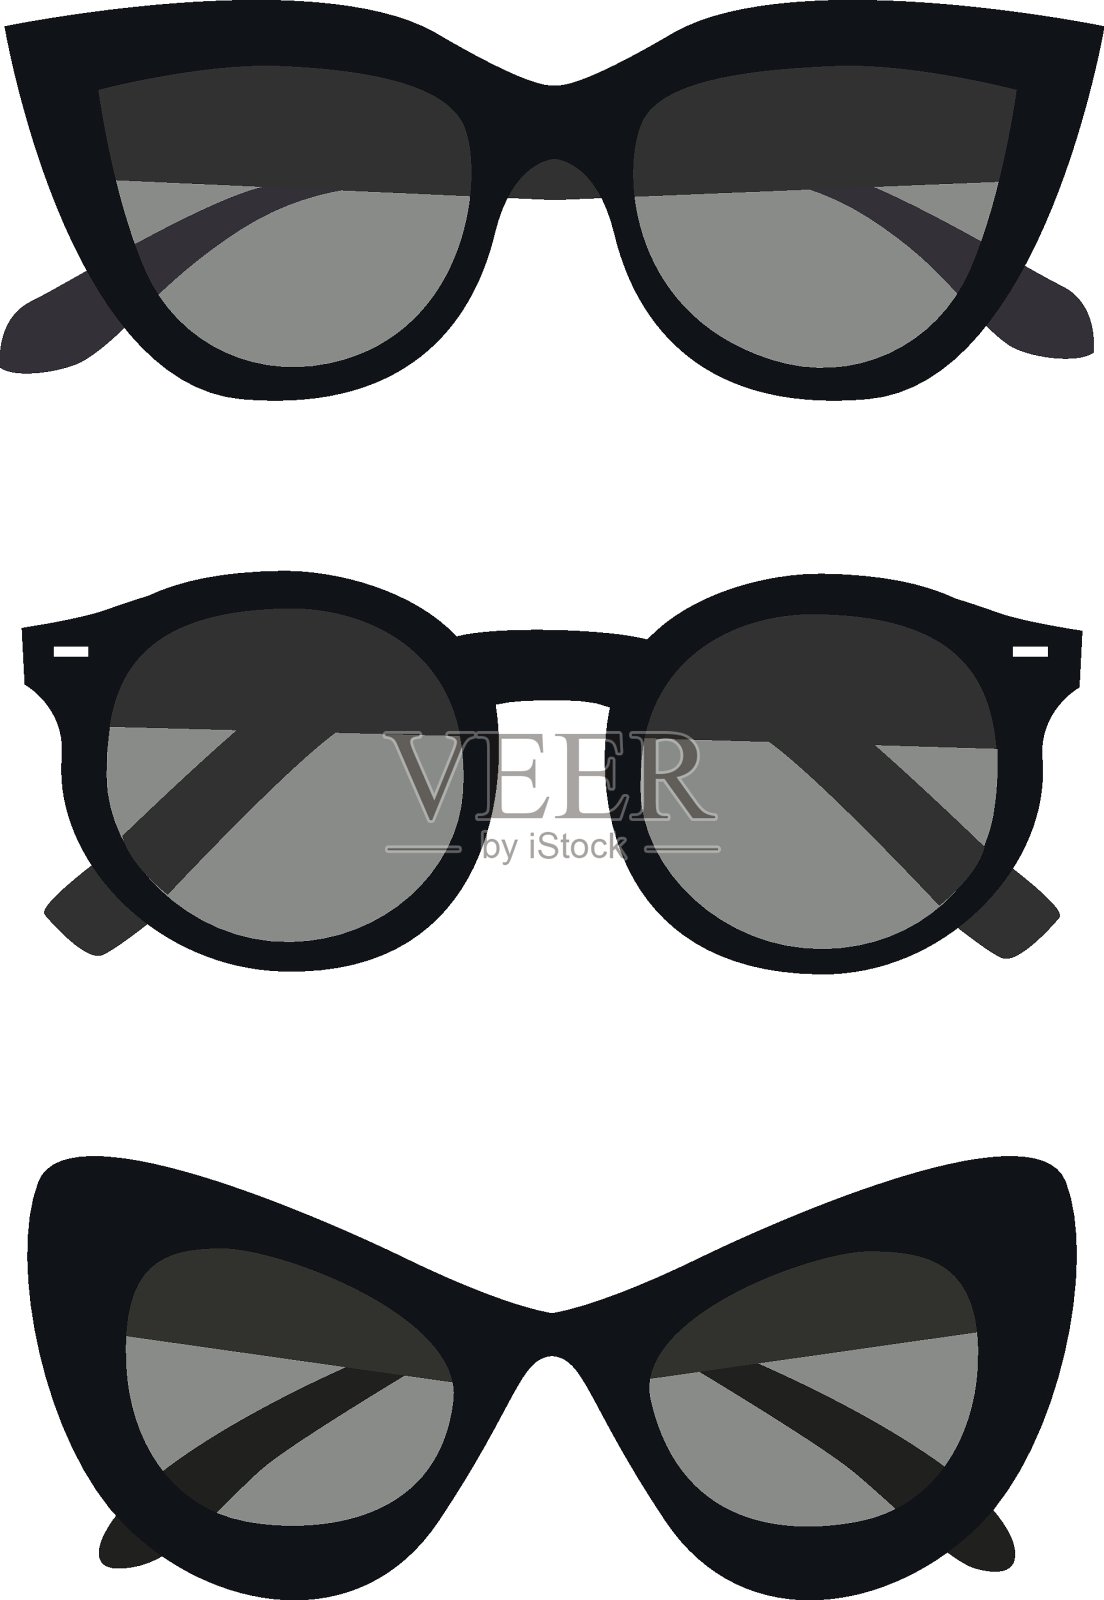 Collection of sunglasses icons插画图片素材